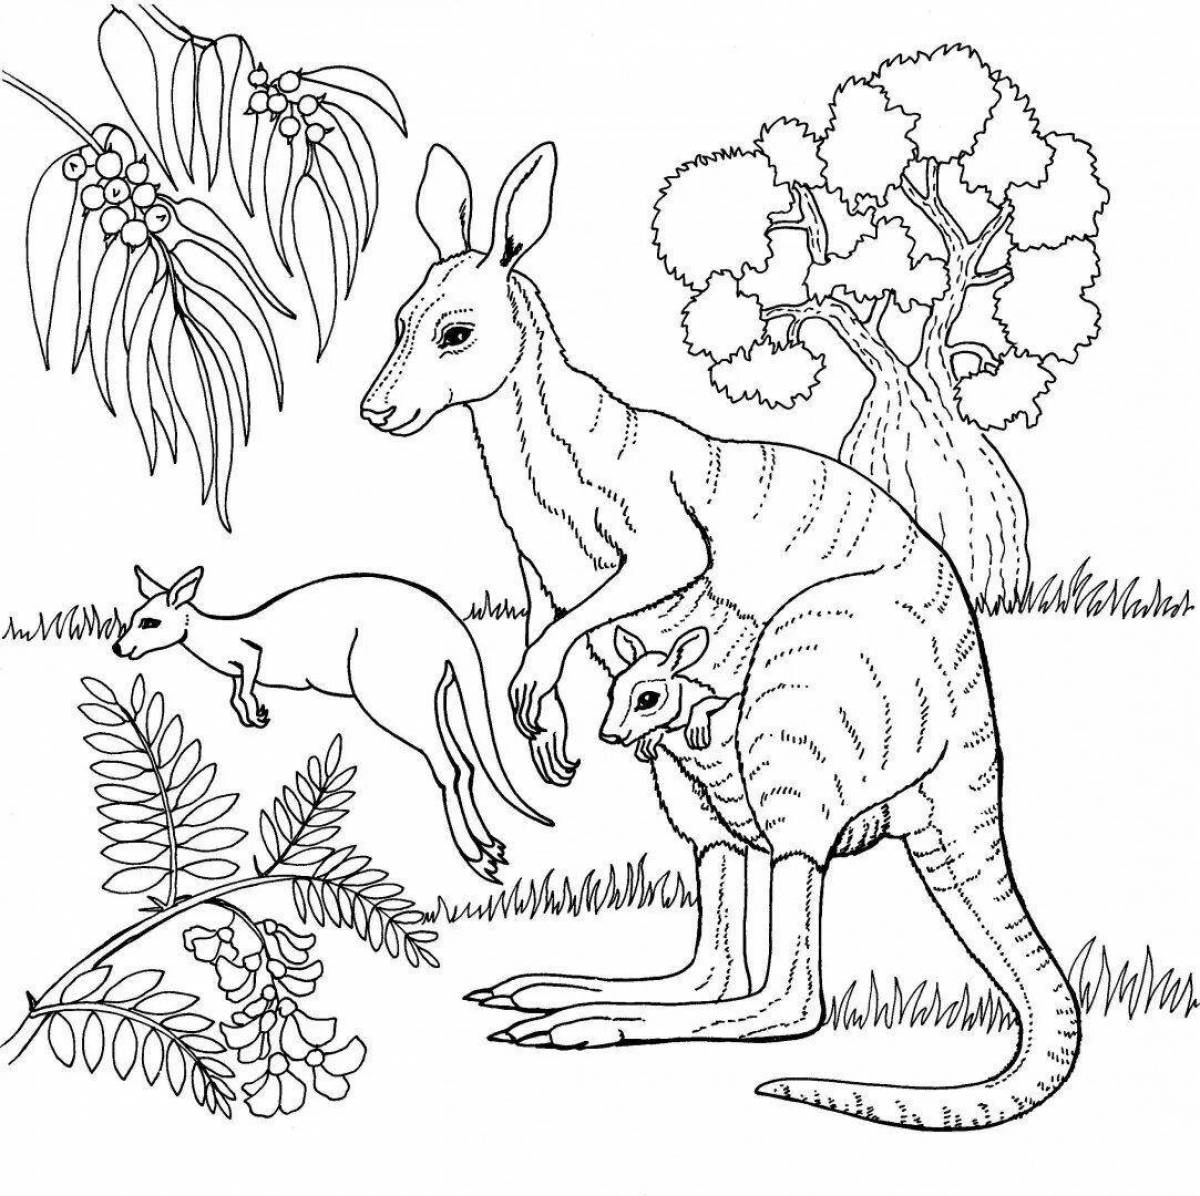 Ferocious alligator coloring page